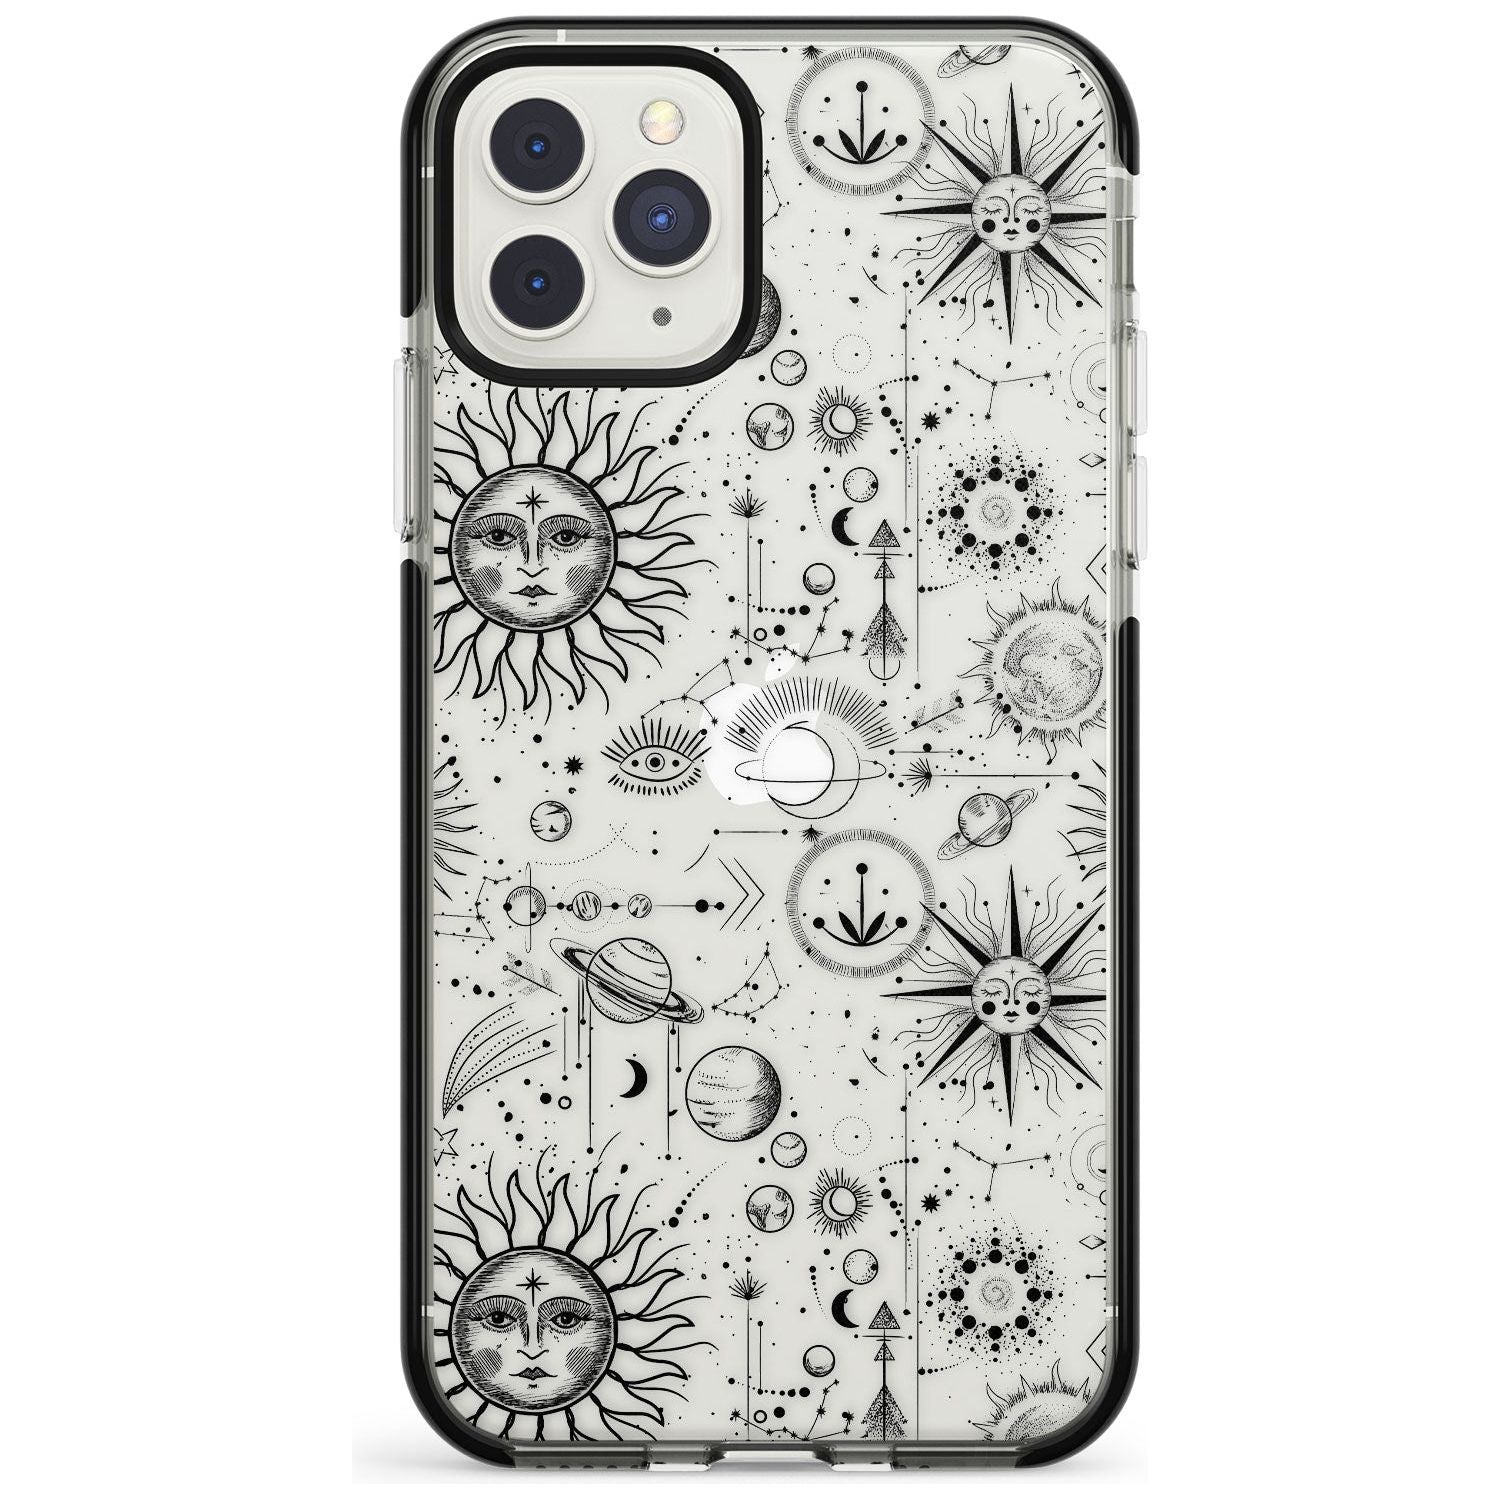 Suns & Planets Astrological Black Impact Phone Case for iPhone 11 Pro Max